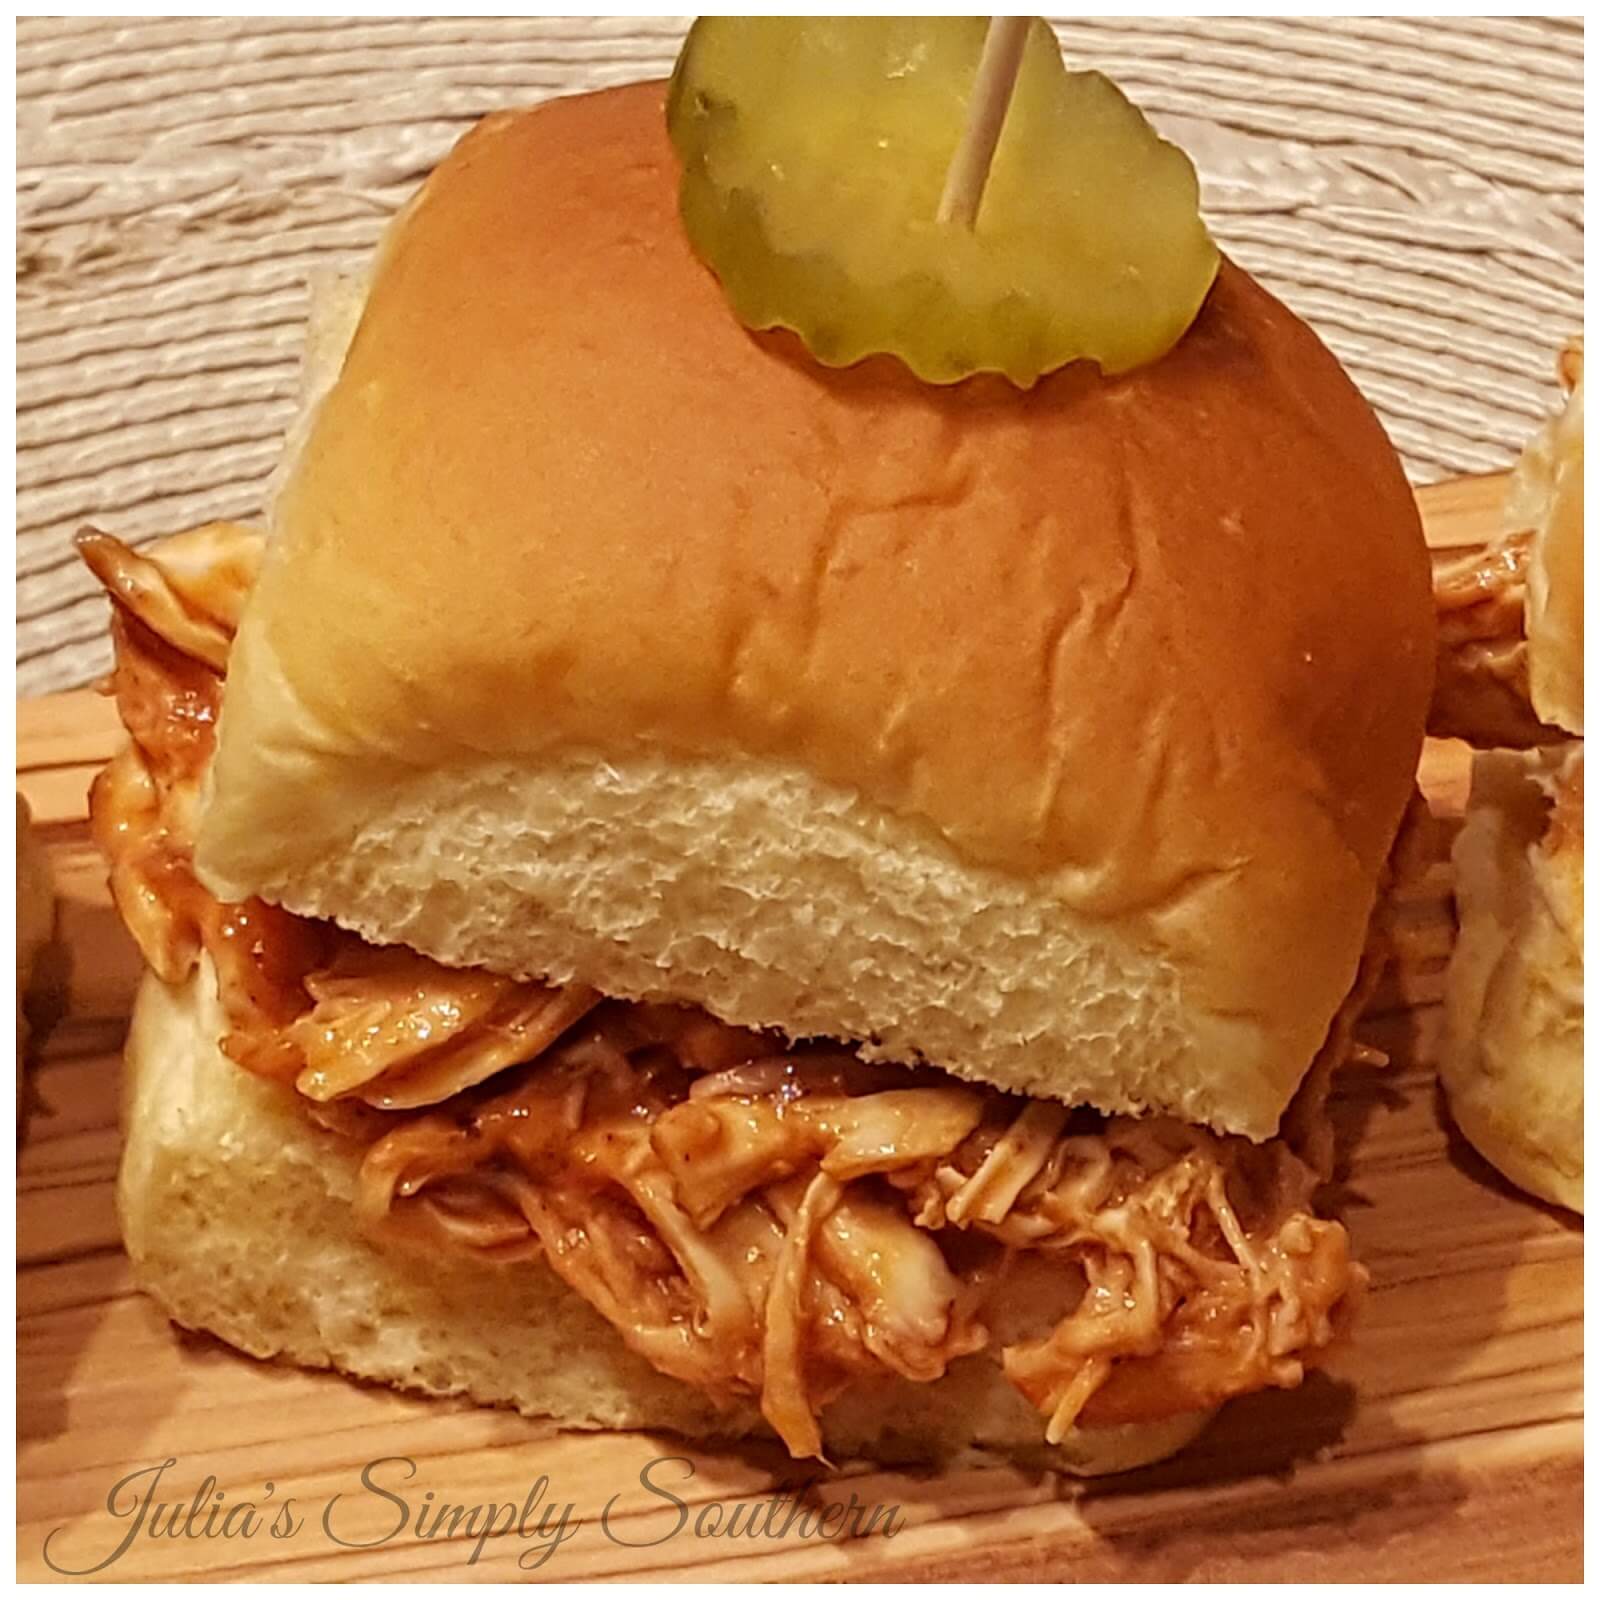 Barbecue Chicken Slider Sandwiches with a pickle served as appetizers or a meal